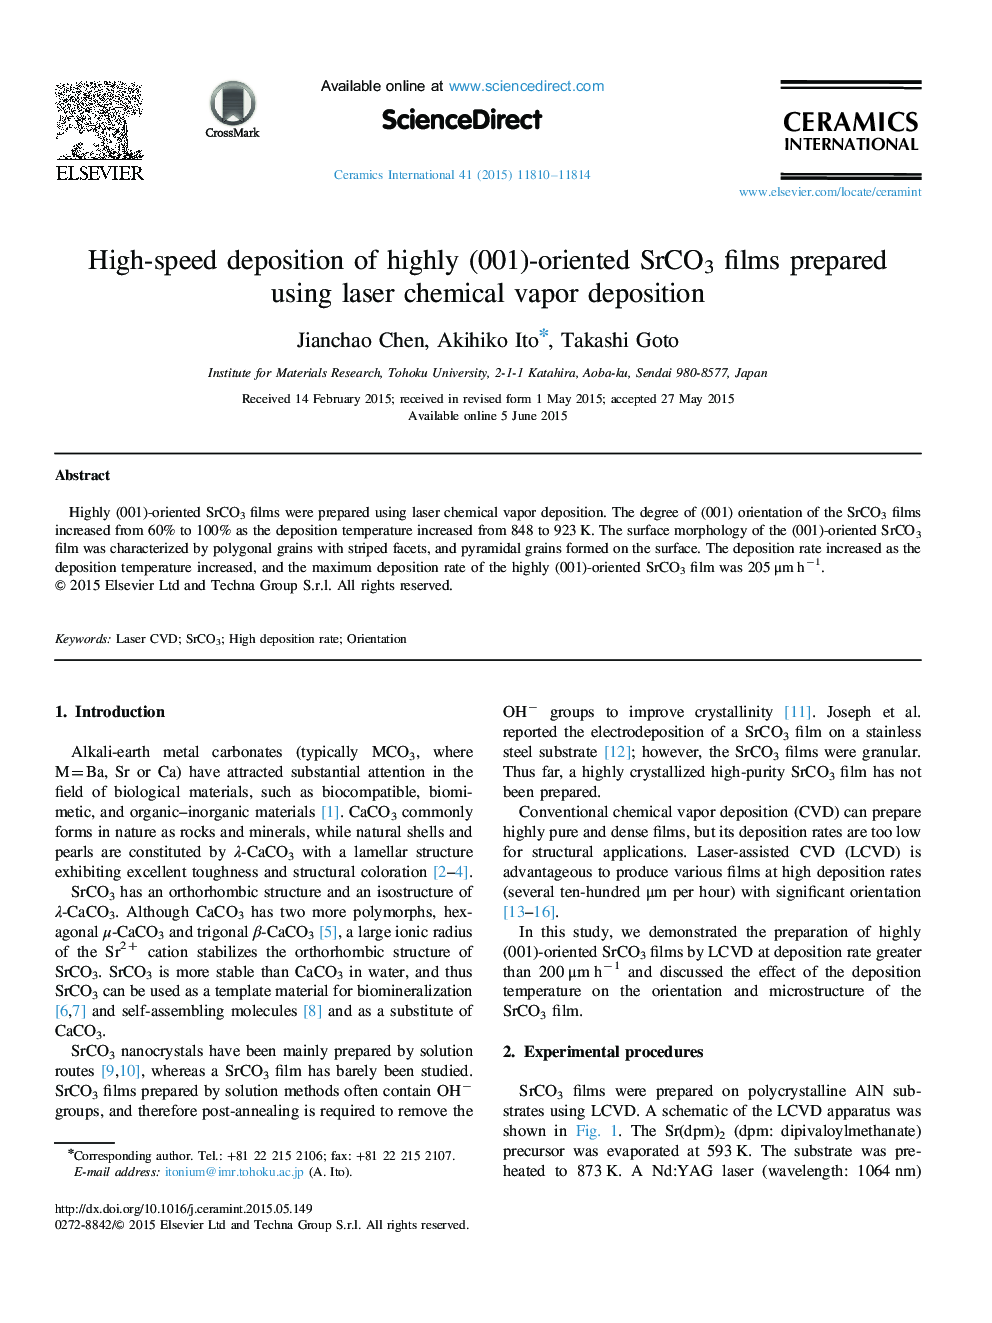 High-speed deposition of highly (001)-oriented SrCO3 films prepared using laser chemical vapor deposition